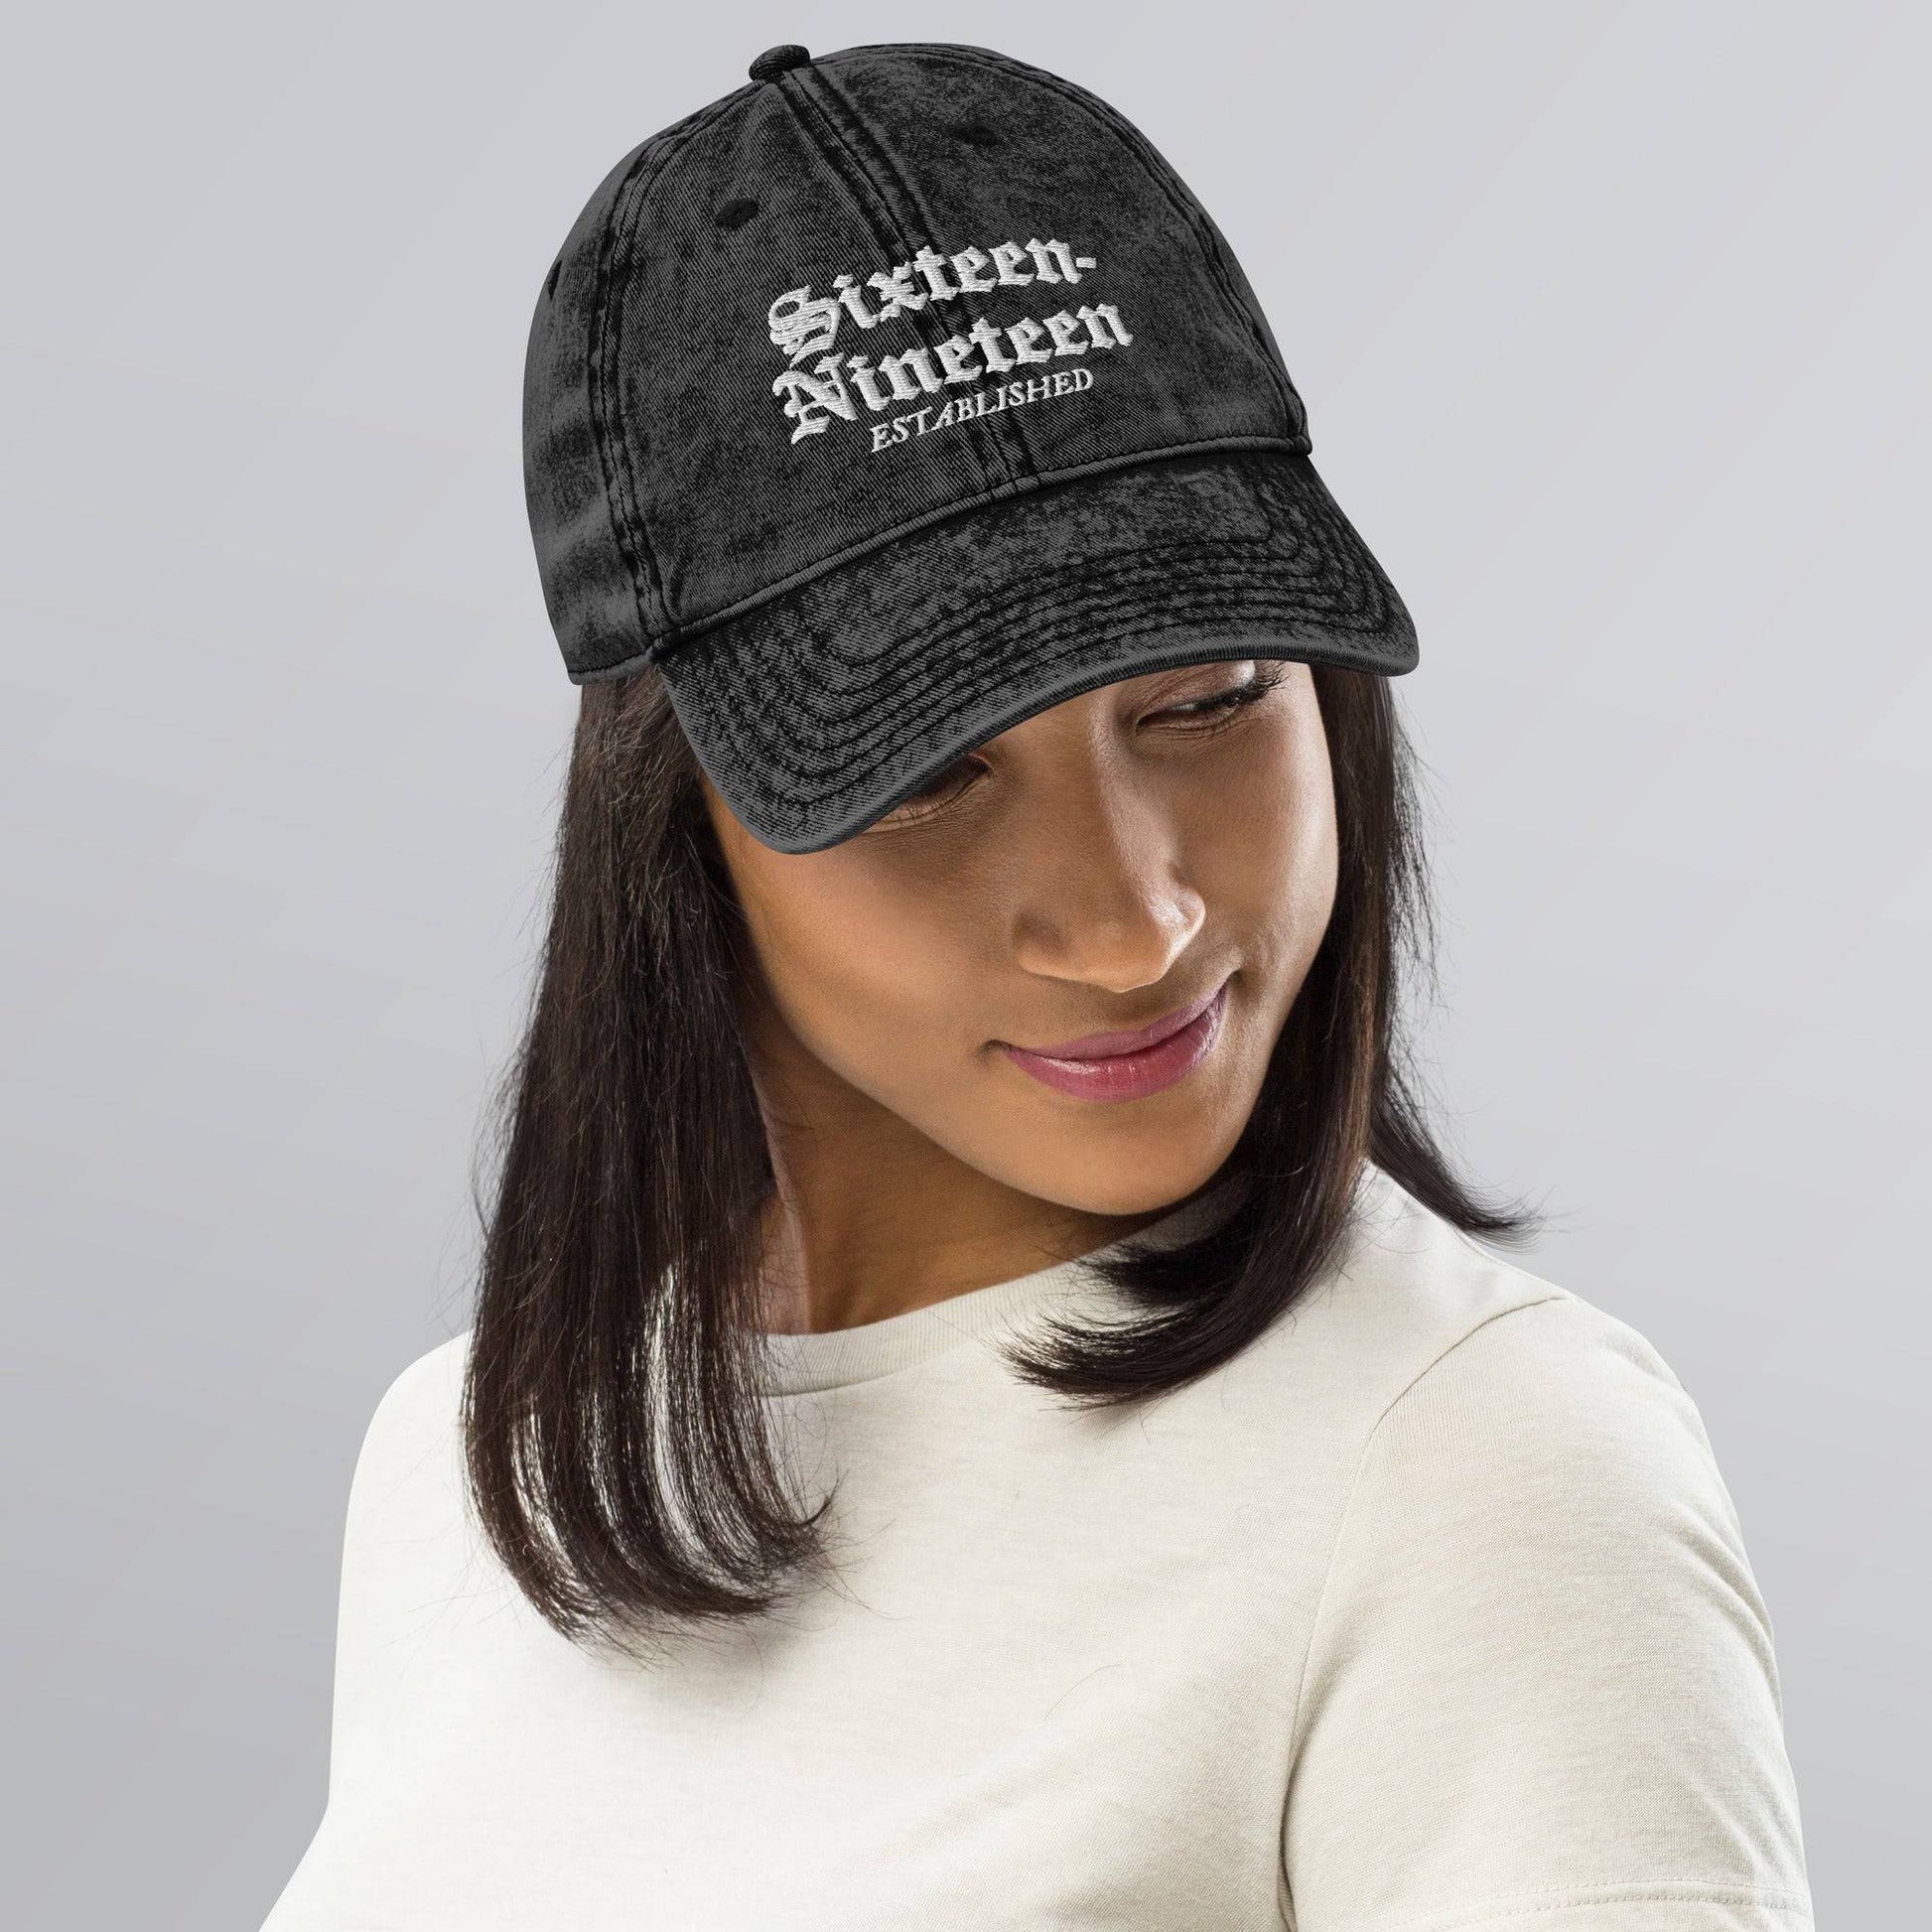 a woman wearing a black hat with white lettering